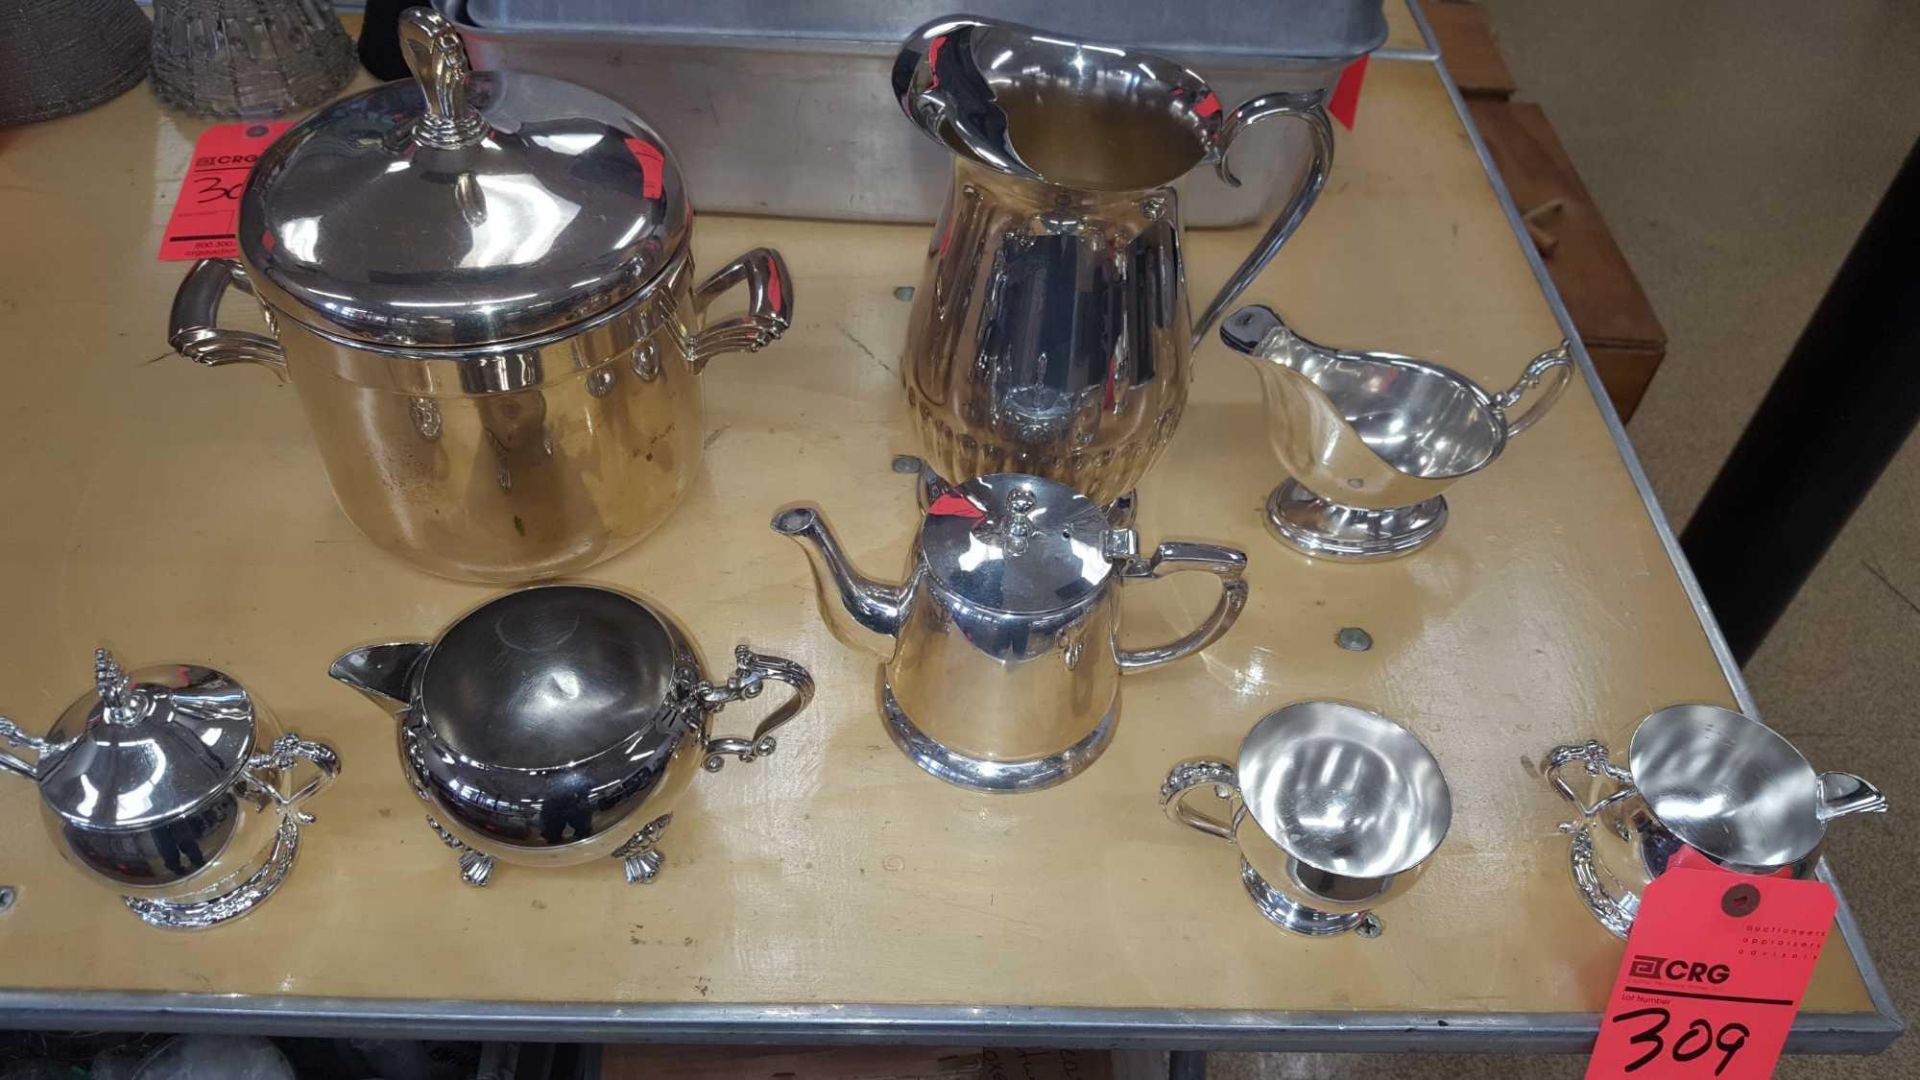 Lot of asst silver serving dishes and pitchers including (7) pitchers, (6) teapots, (9) large - Image 3 of 3